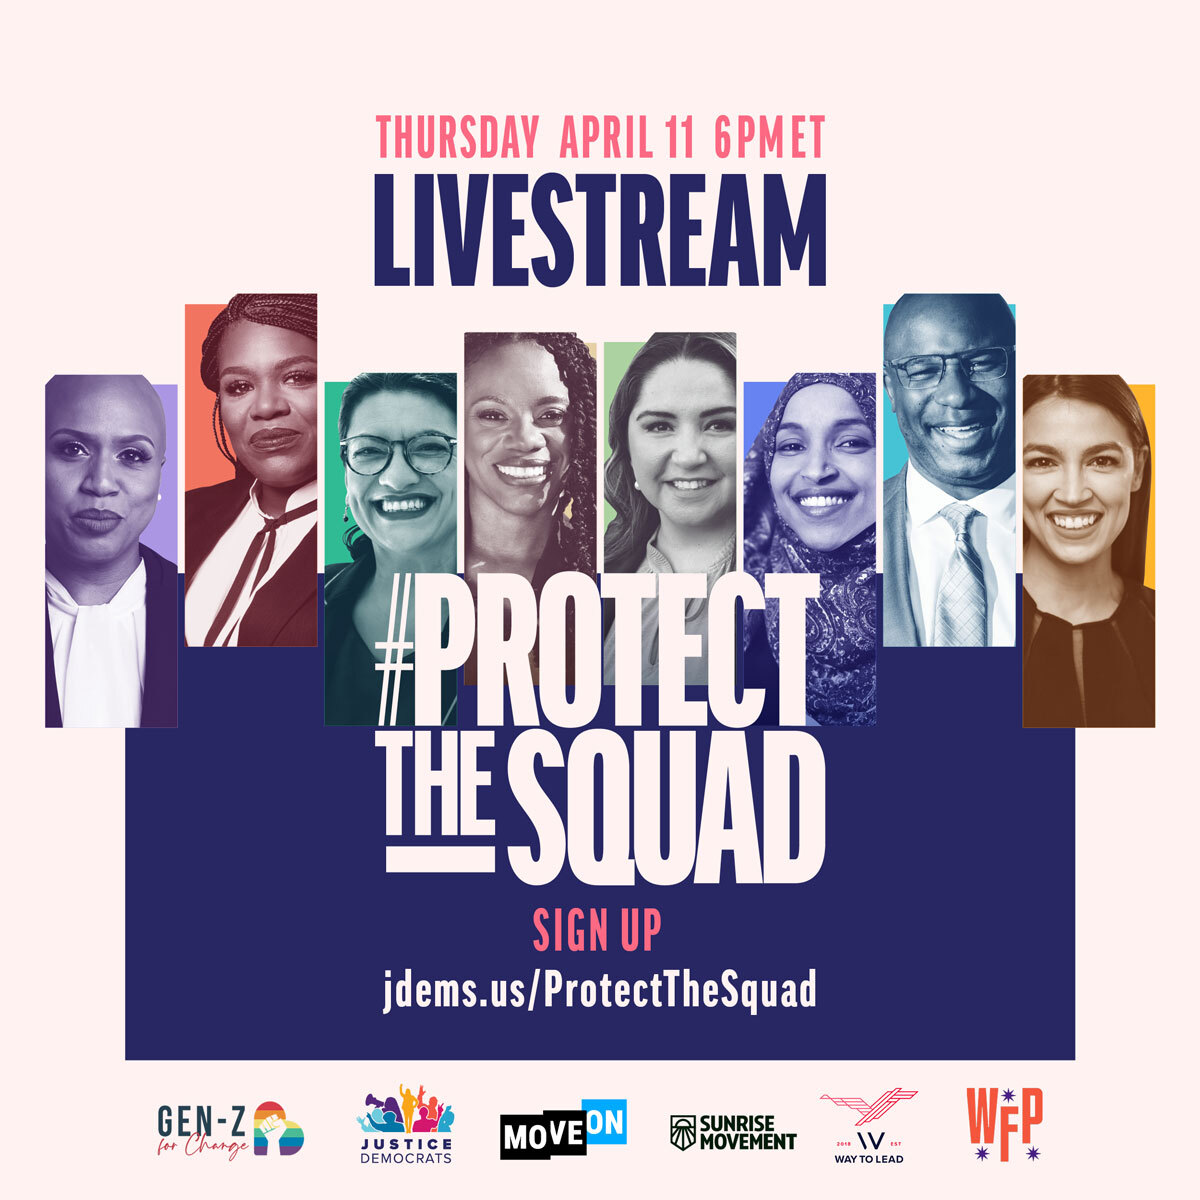 Only a handful of progressives in Congress have stood up for the needs of everyday people in the face of the corporate establishment & AIPAC. Now, those right-wing forces are trying to stop us. Join us this Thurs for a virtual kickoff to #ProtectTheSquad. jdems.us/ProtectTheSquad